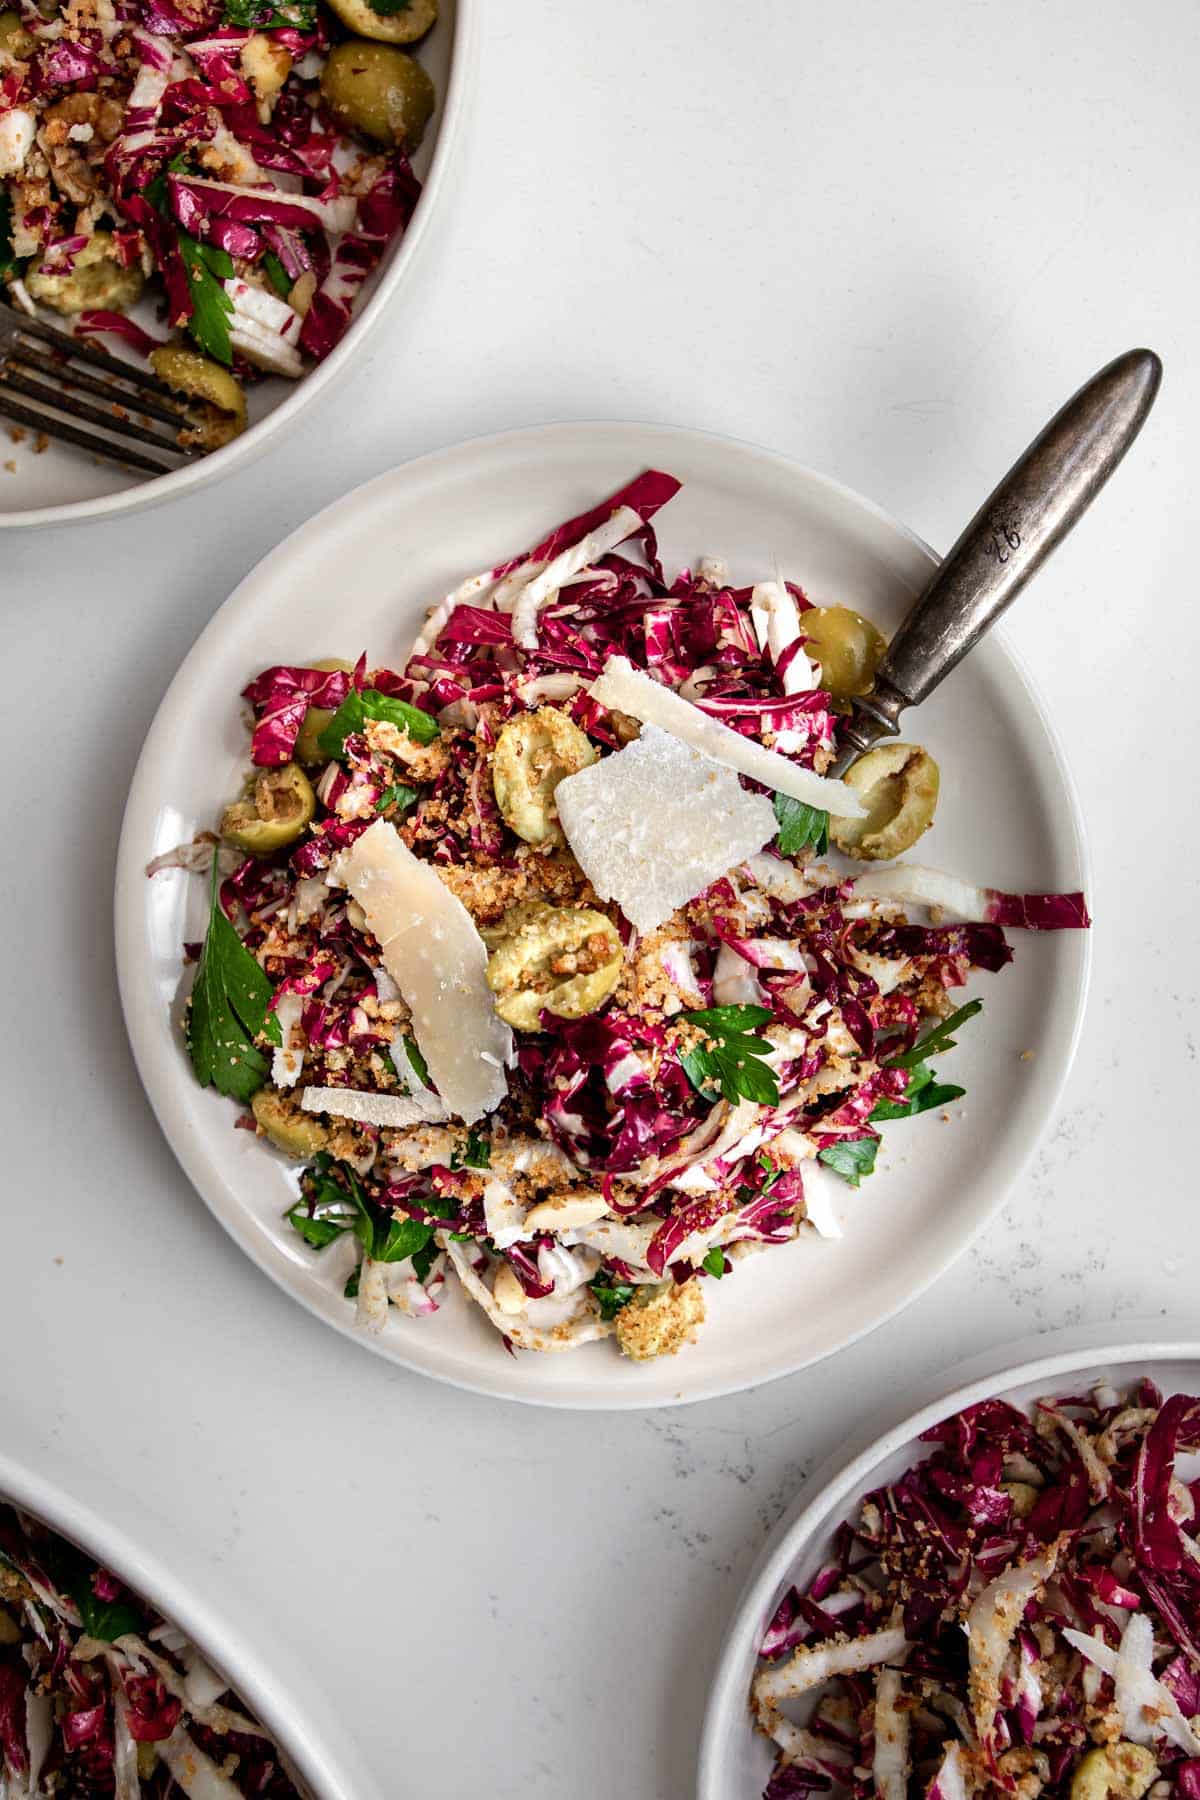 radicchio salad topped with parmesan, lemon dressing and olives on a plate with a fork.